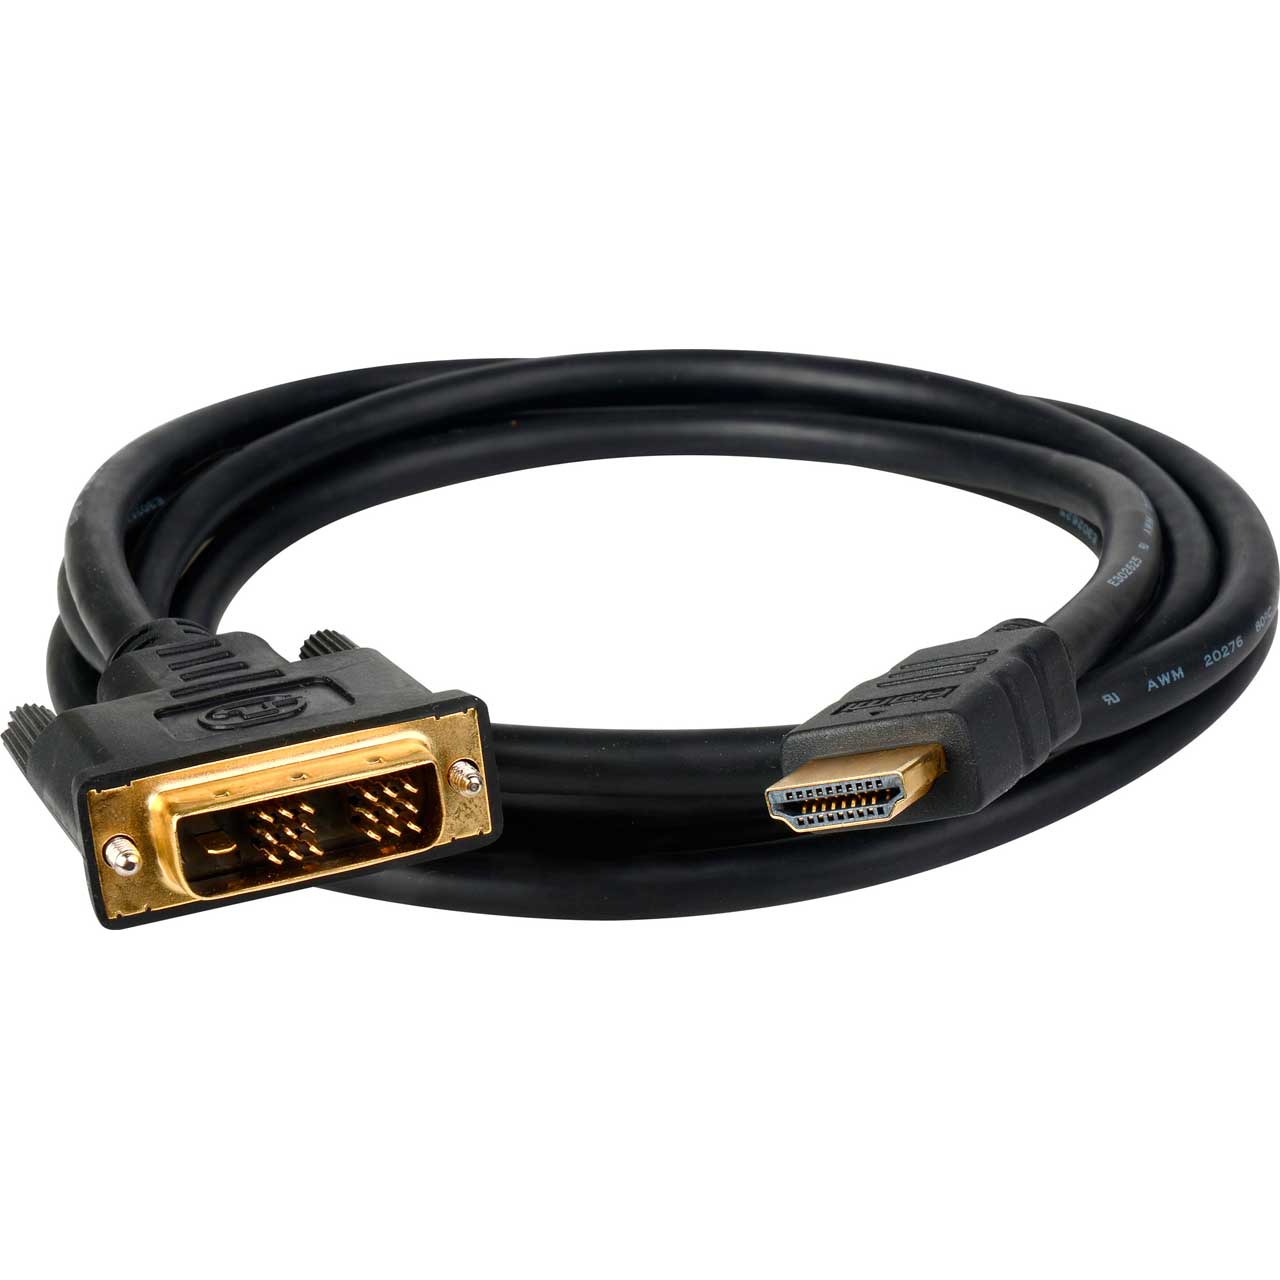 Connectronics HDMI to DVI-D Digital Monitor Adapter 6 Foot